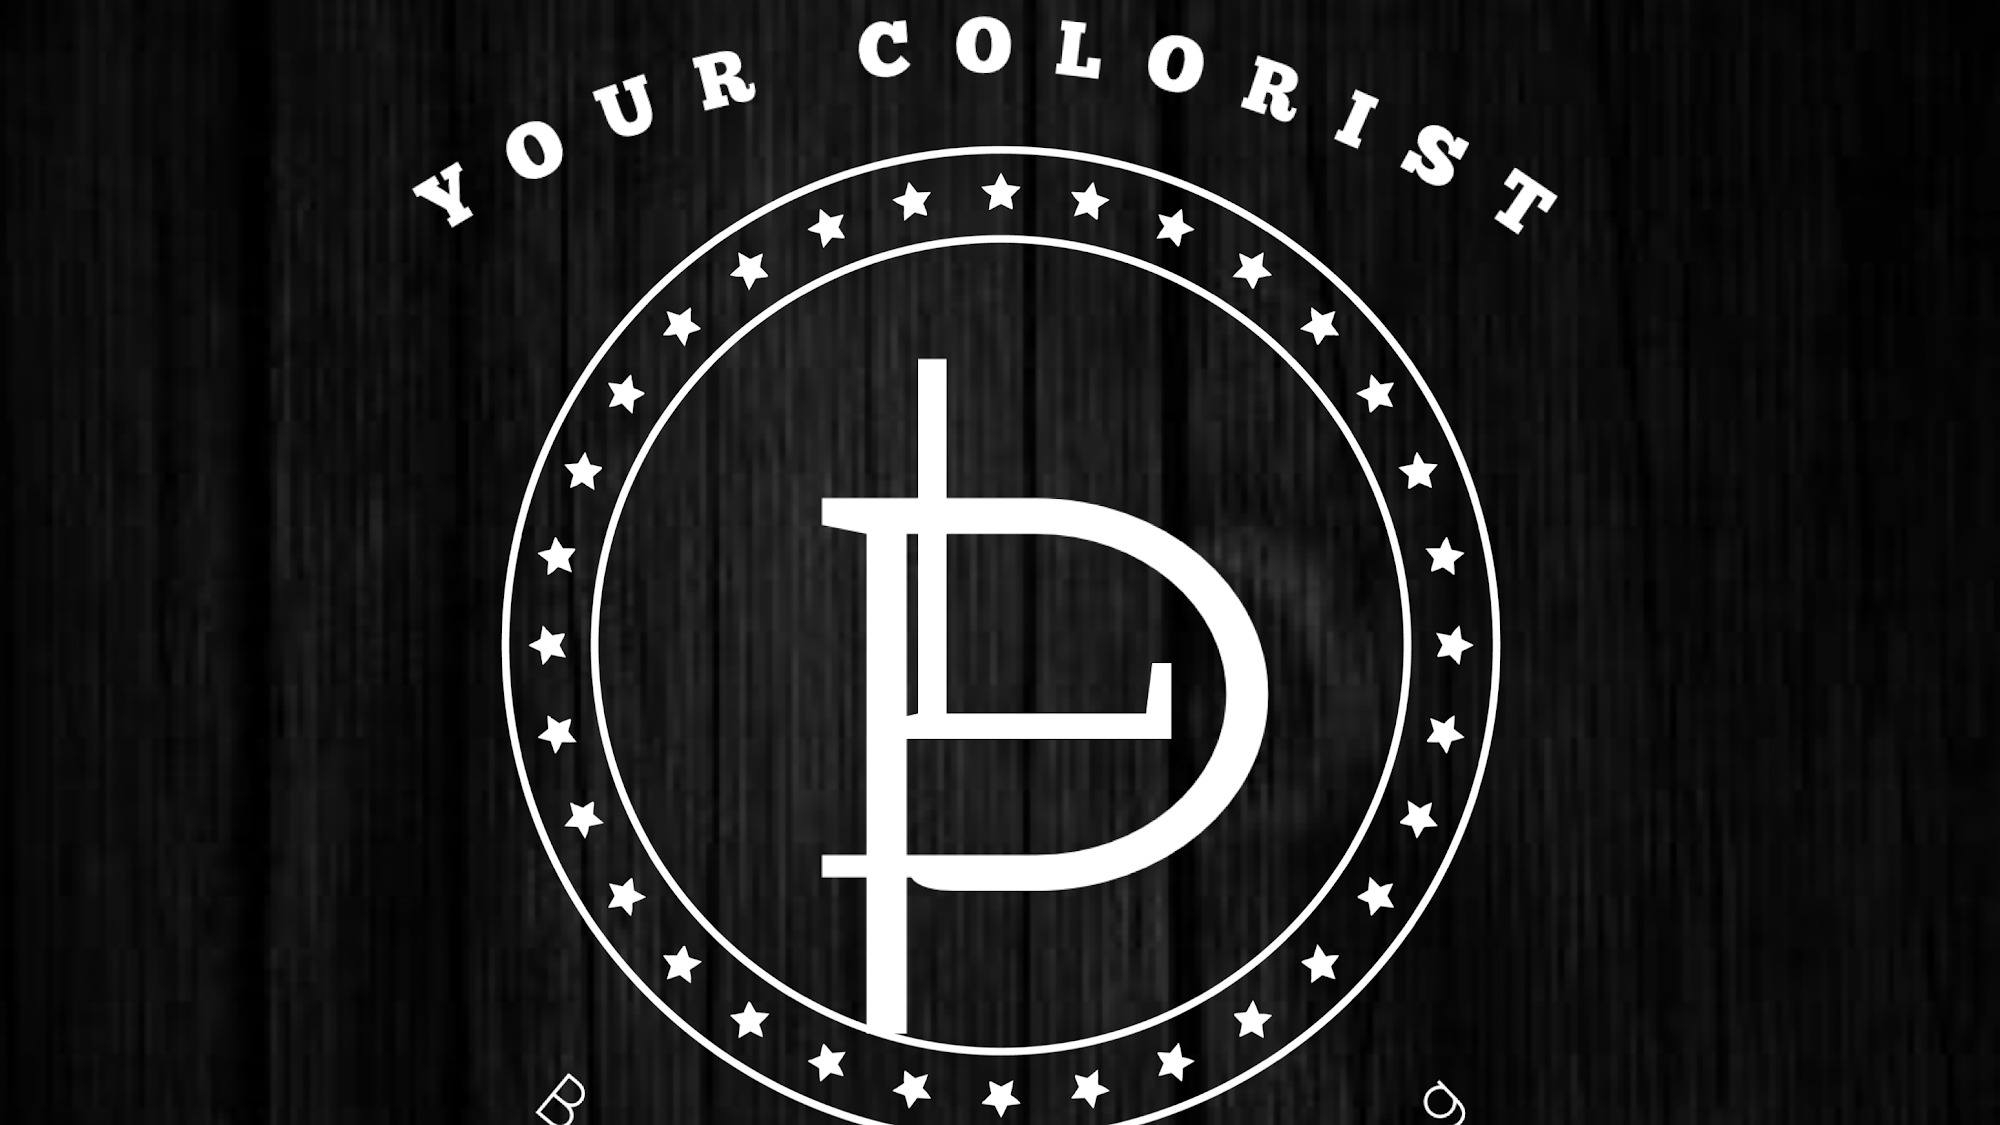 Your Colorist